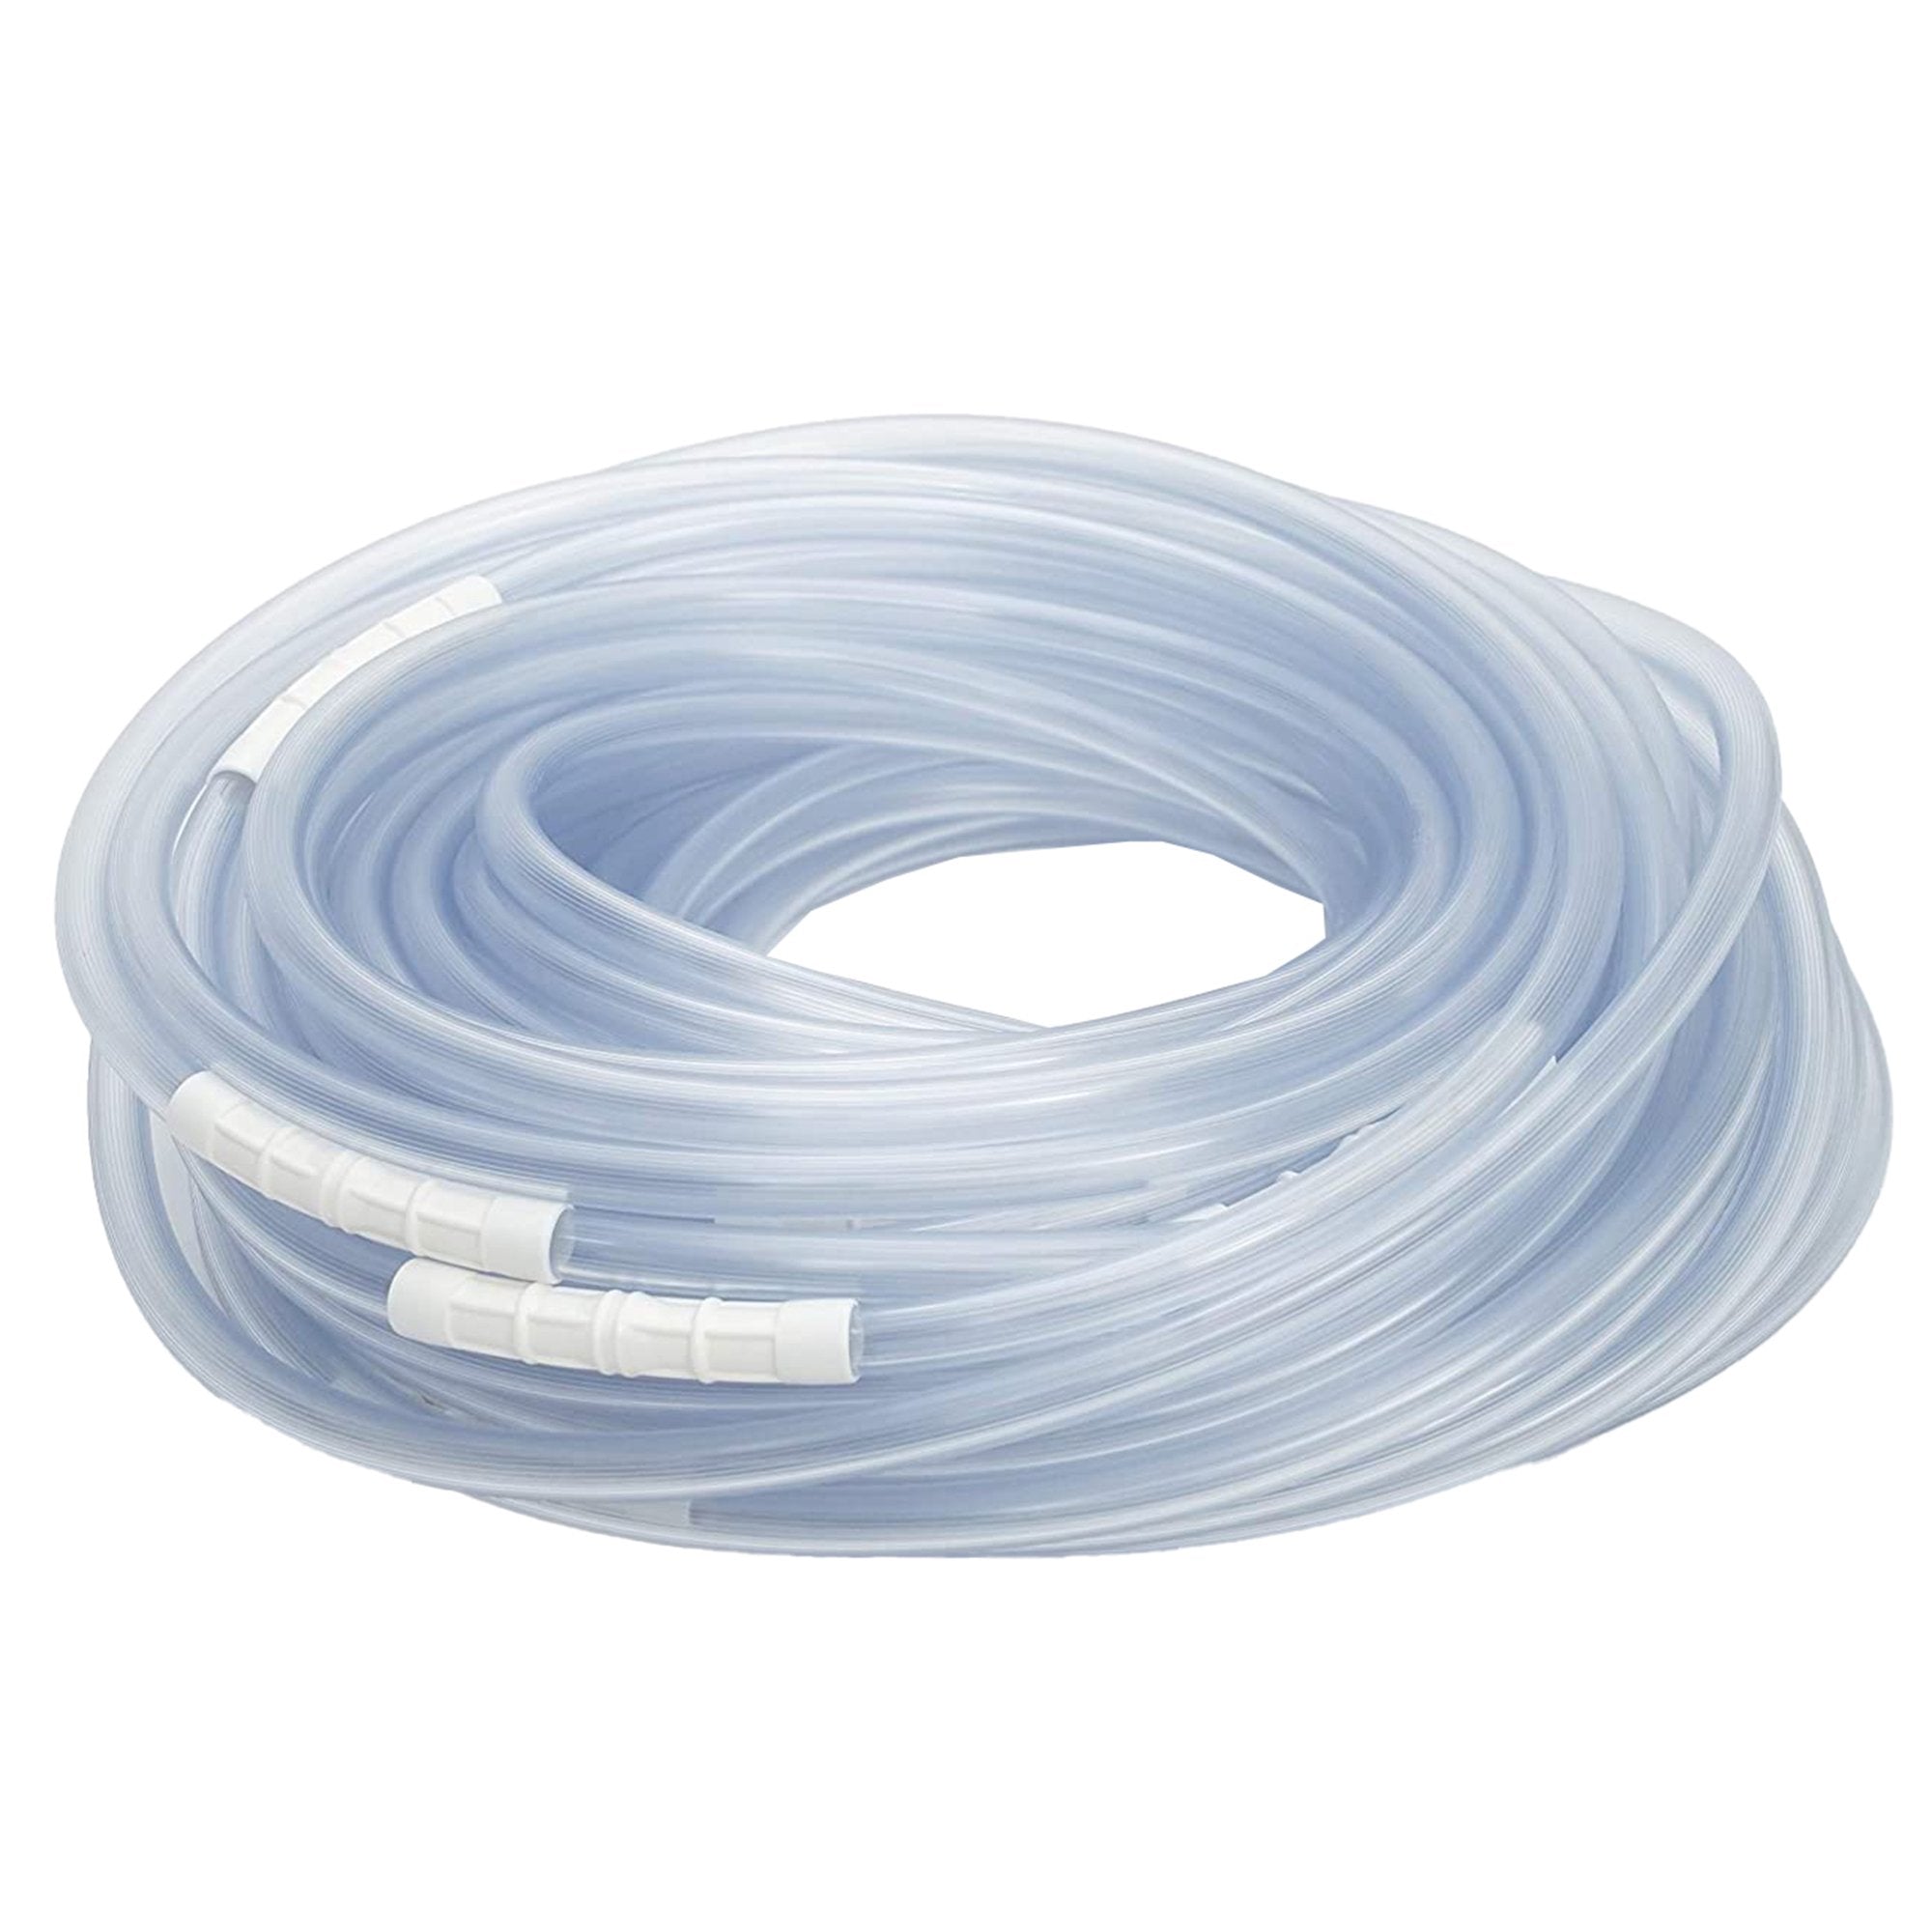 Suction Connector Tubing Medi-Vac 100 Foot Length 0.24 Inch I.D. NonSterile Maxi-Grip Connector Clear Smooth OT Surface NonConductive Plastic